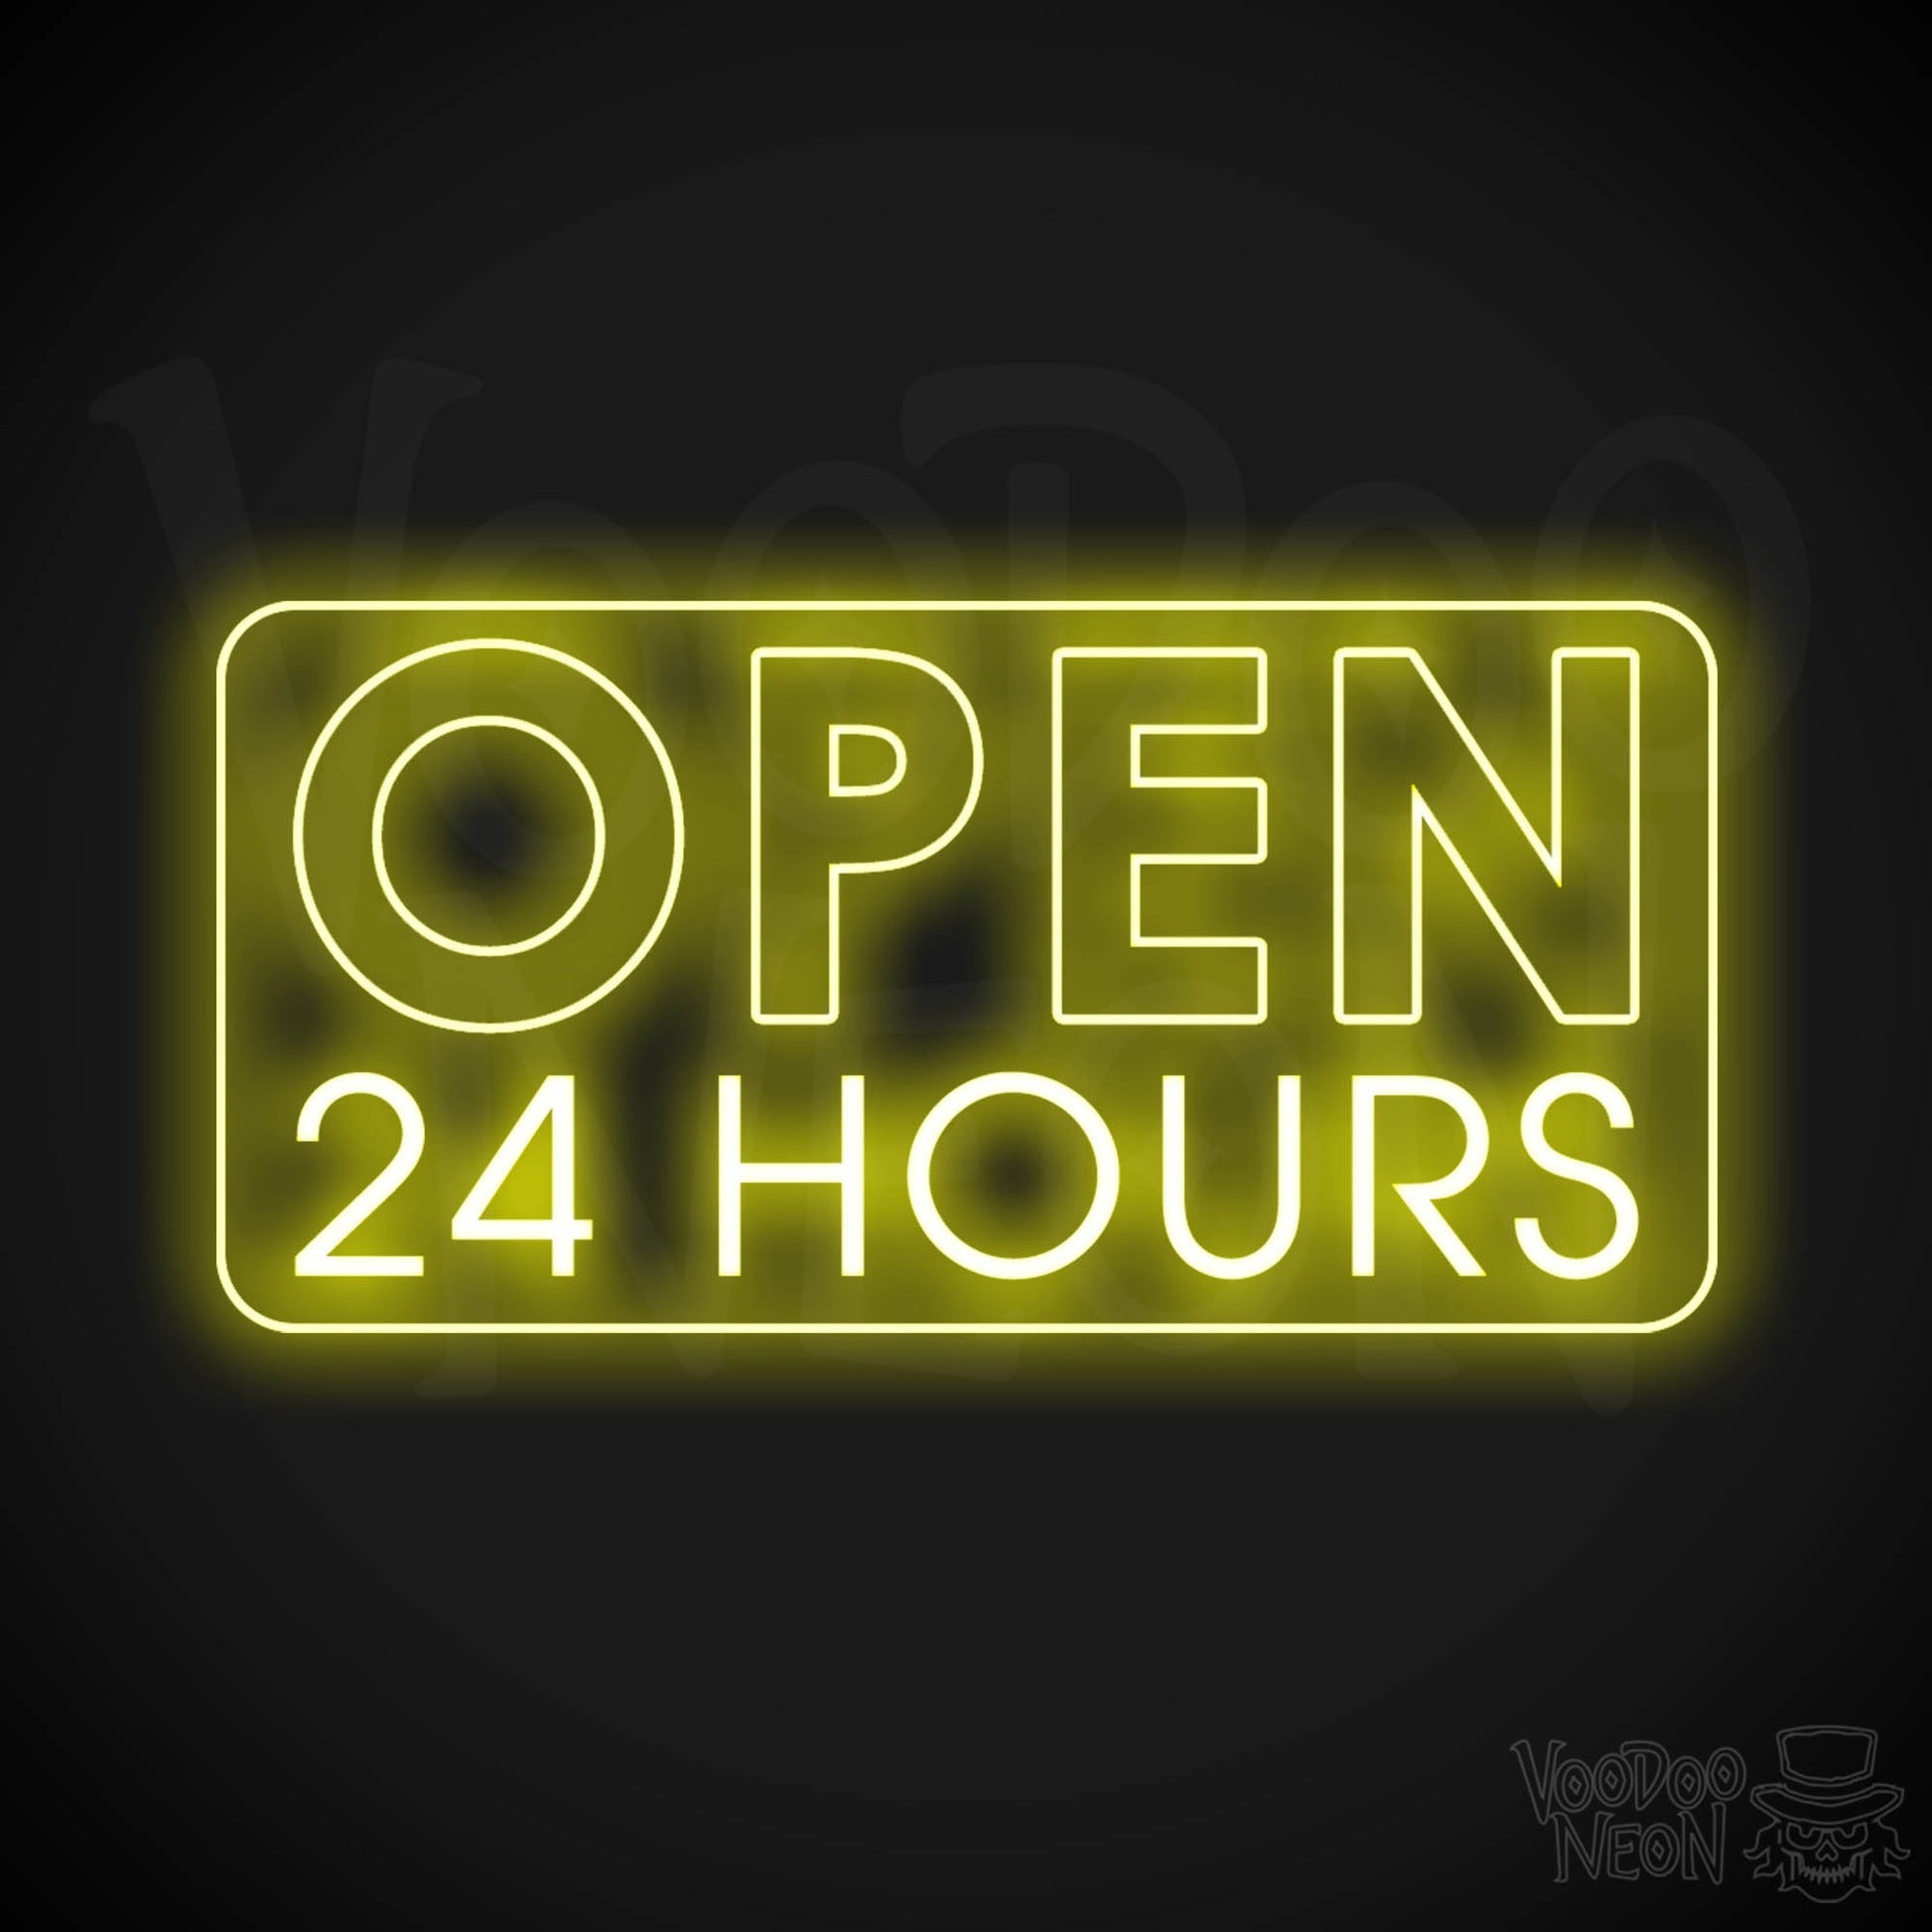 Open 24 Hours Neon Sign - Neon Open 24 Hours Sign - Shop Signs - Color Yellow